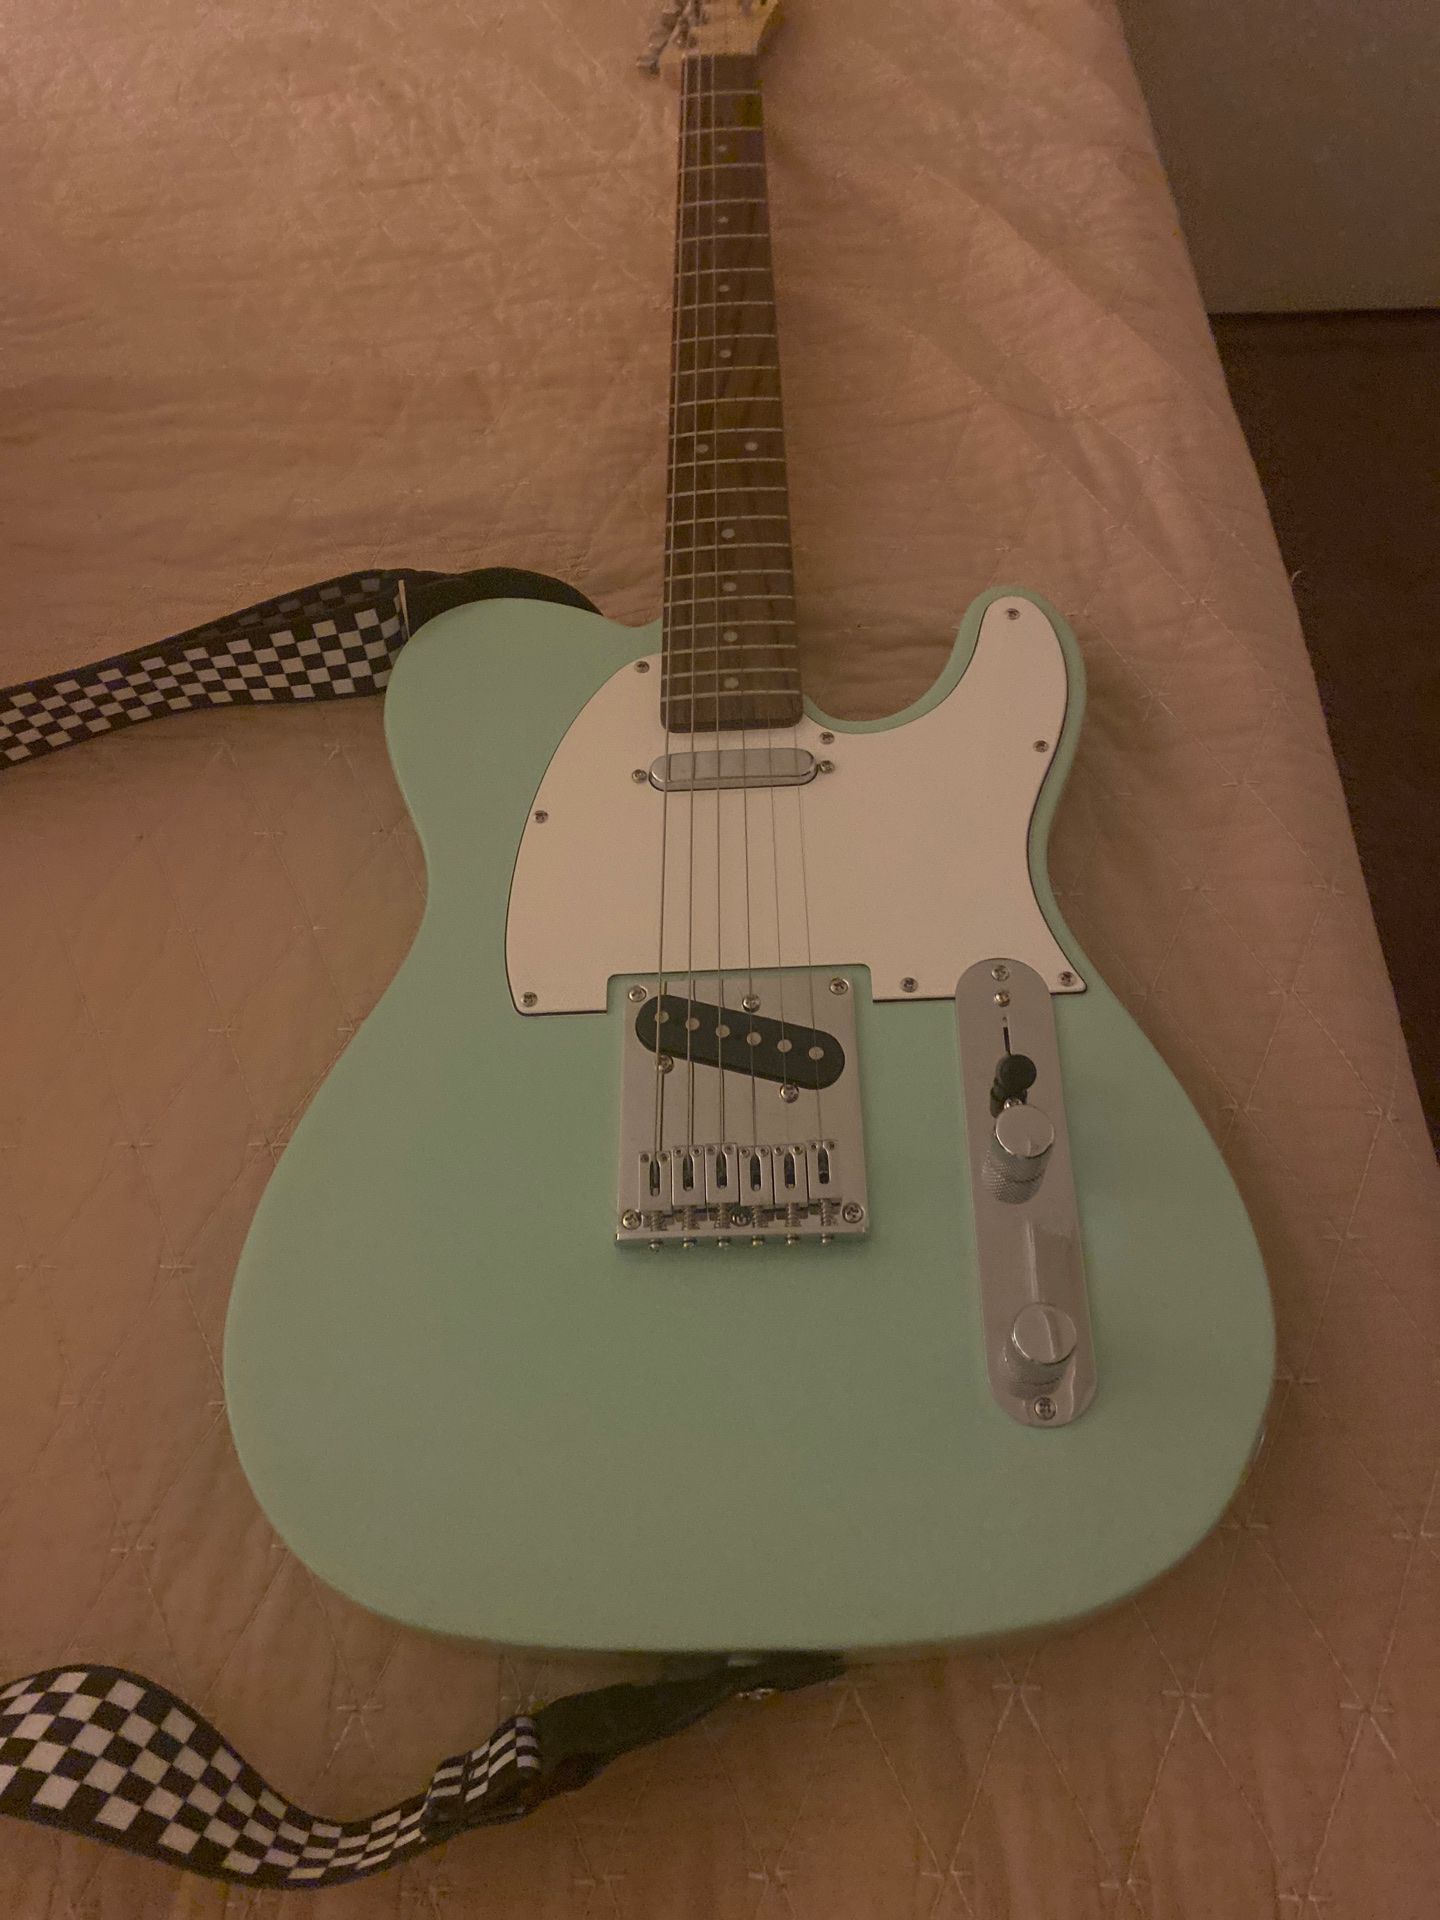 New Squier telecaster seafoam green, Two guitar straps one black and other checkered, back pack case brand new